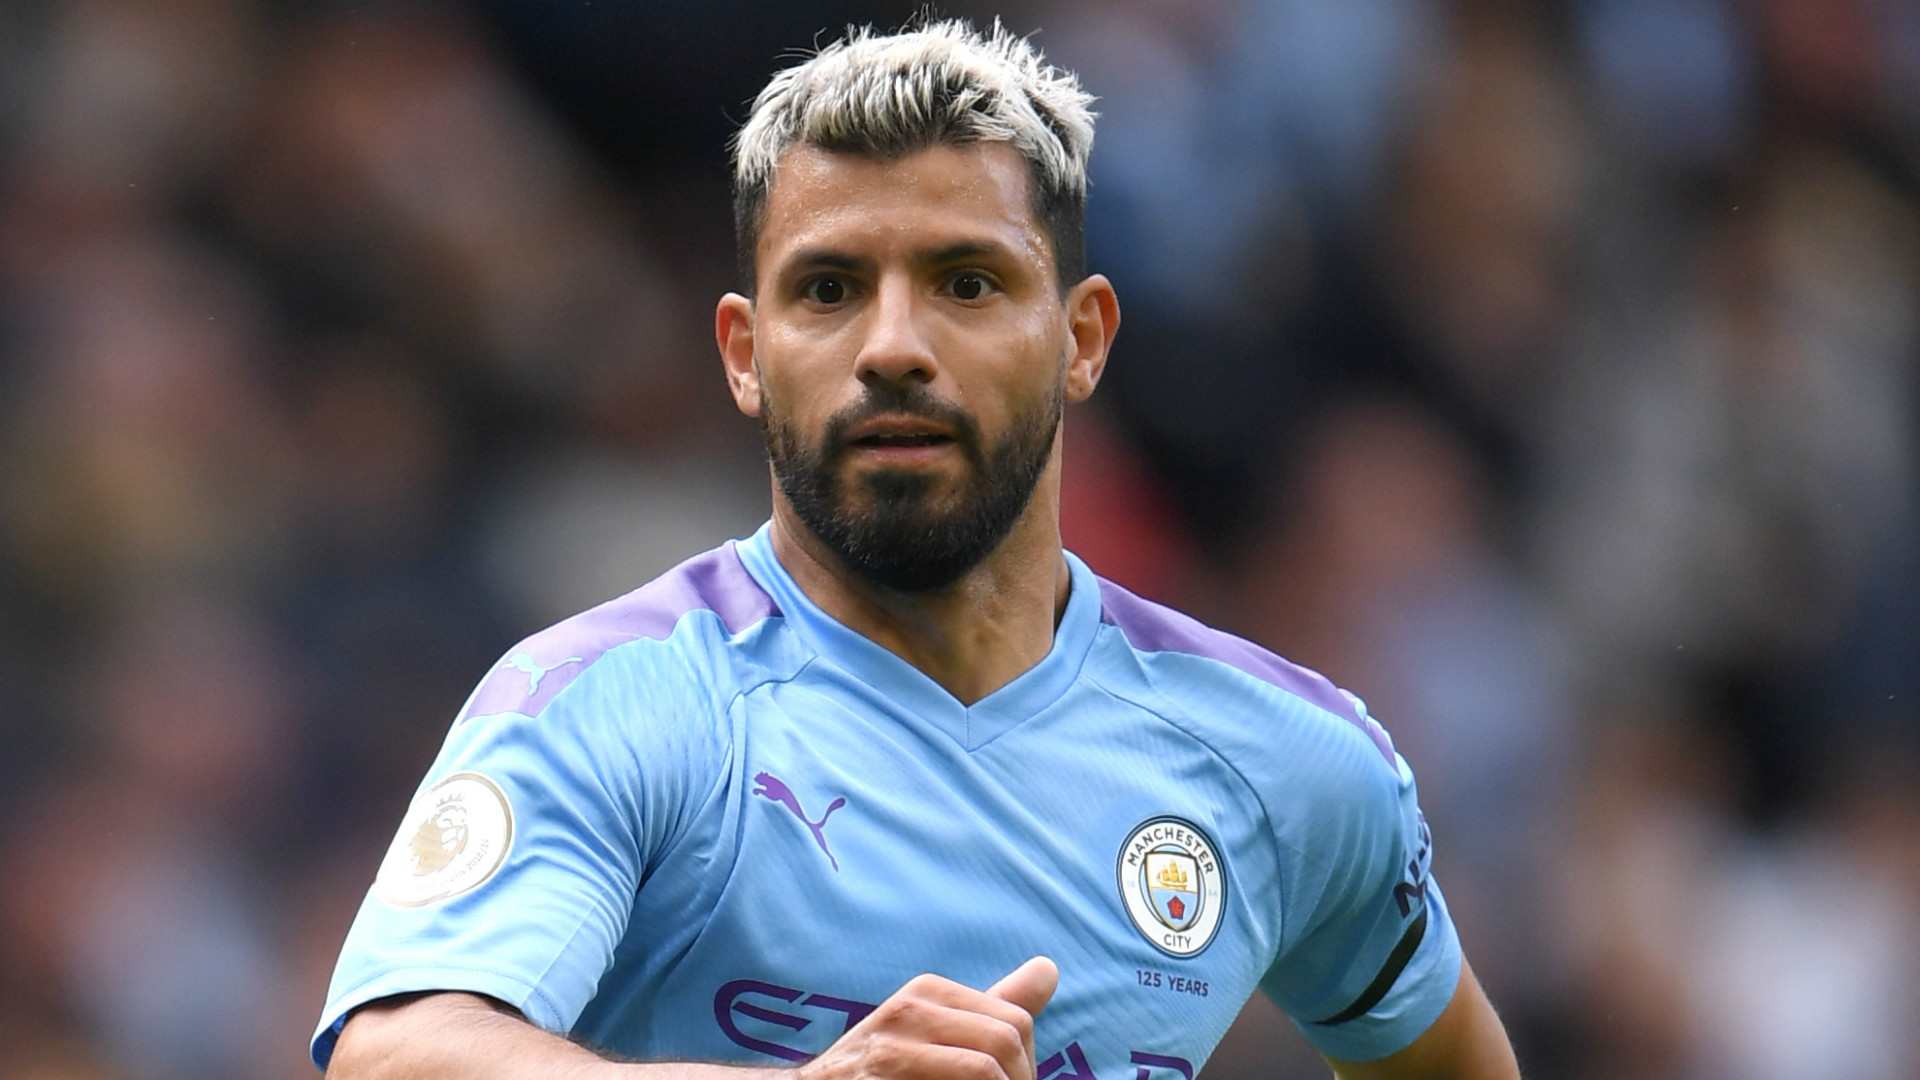 'Liverpool are the only team who can hurt us in the Premier League' - Aguero